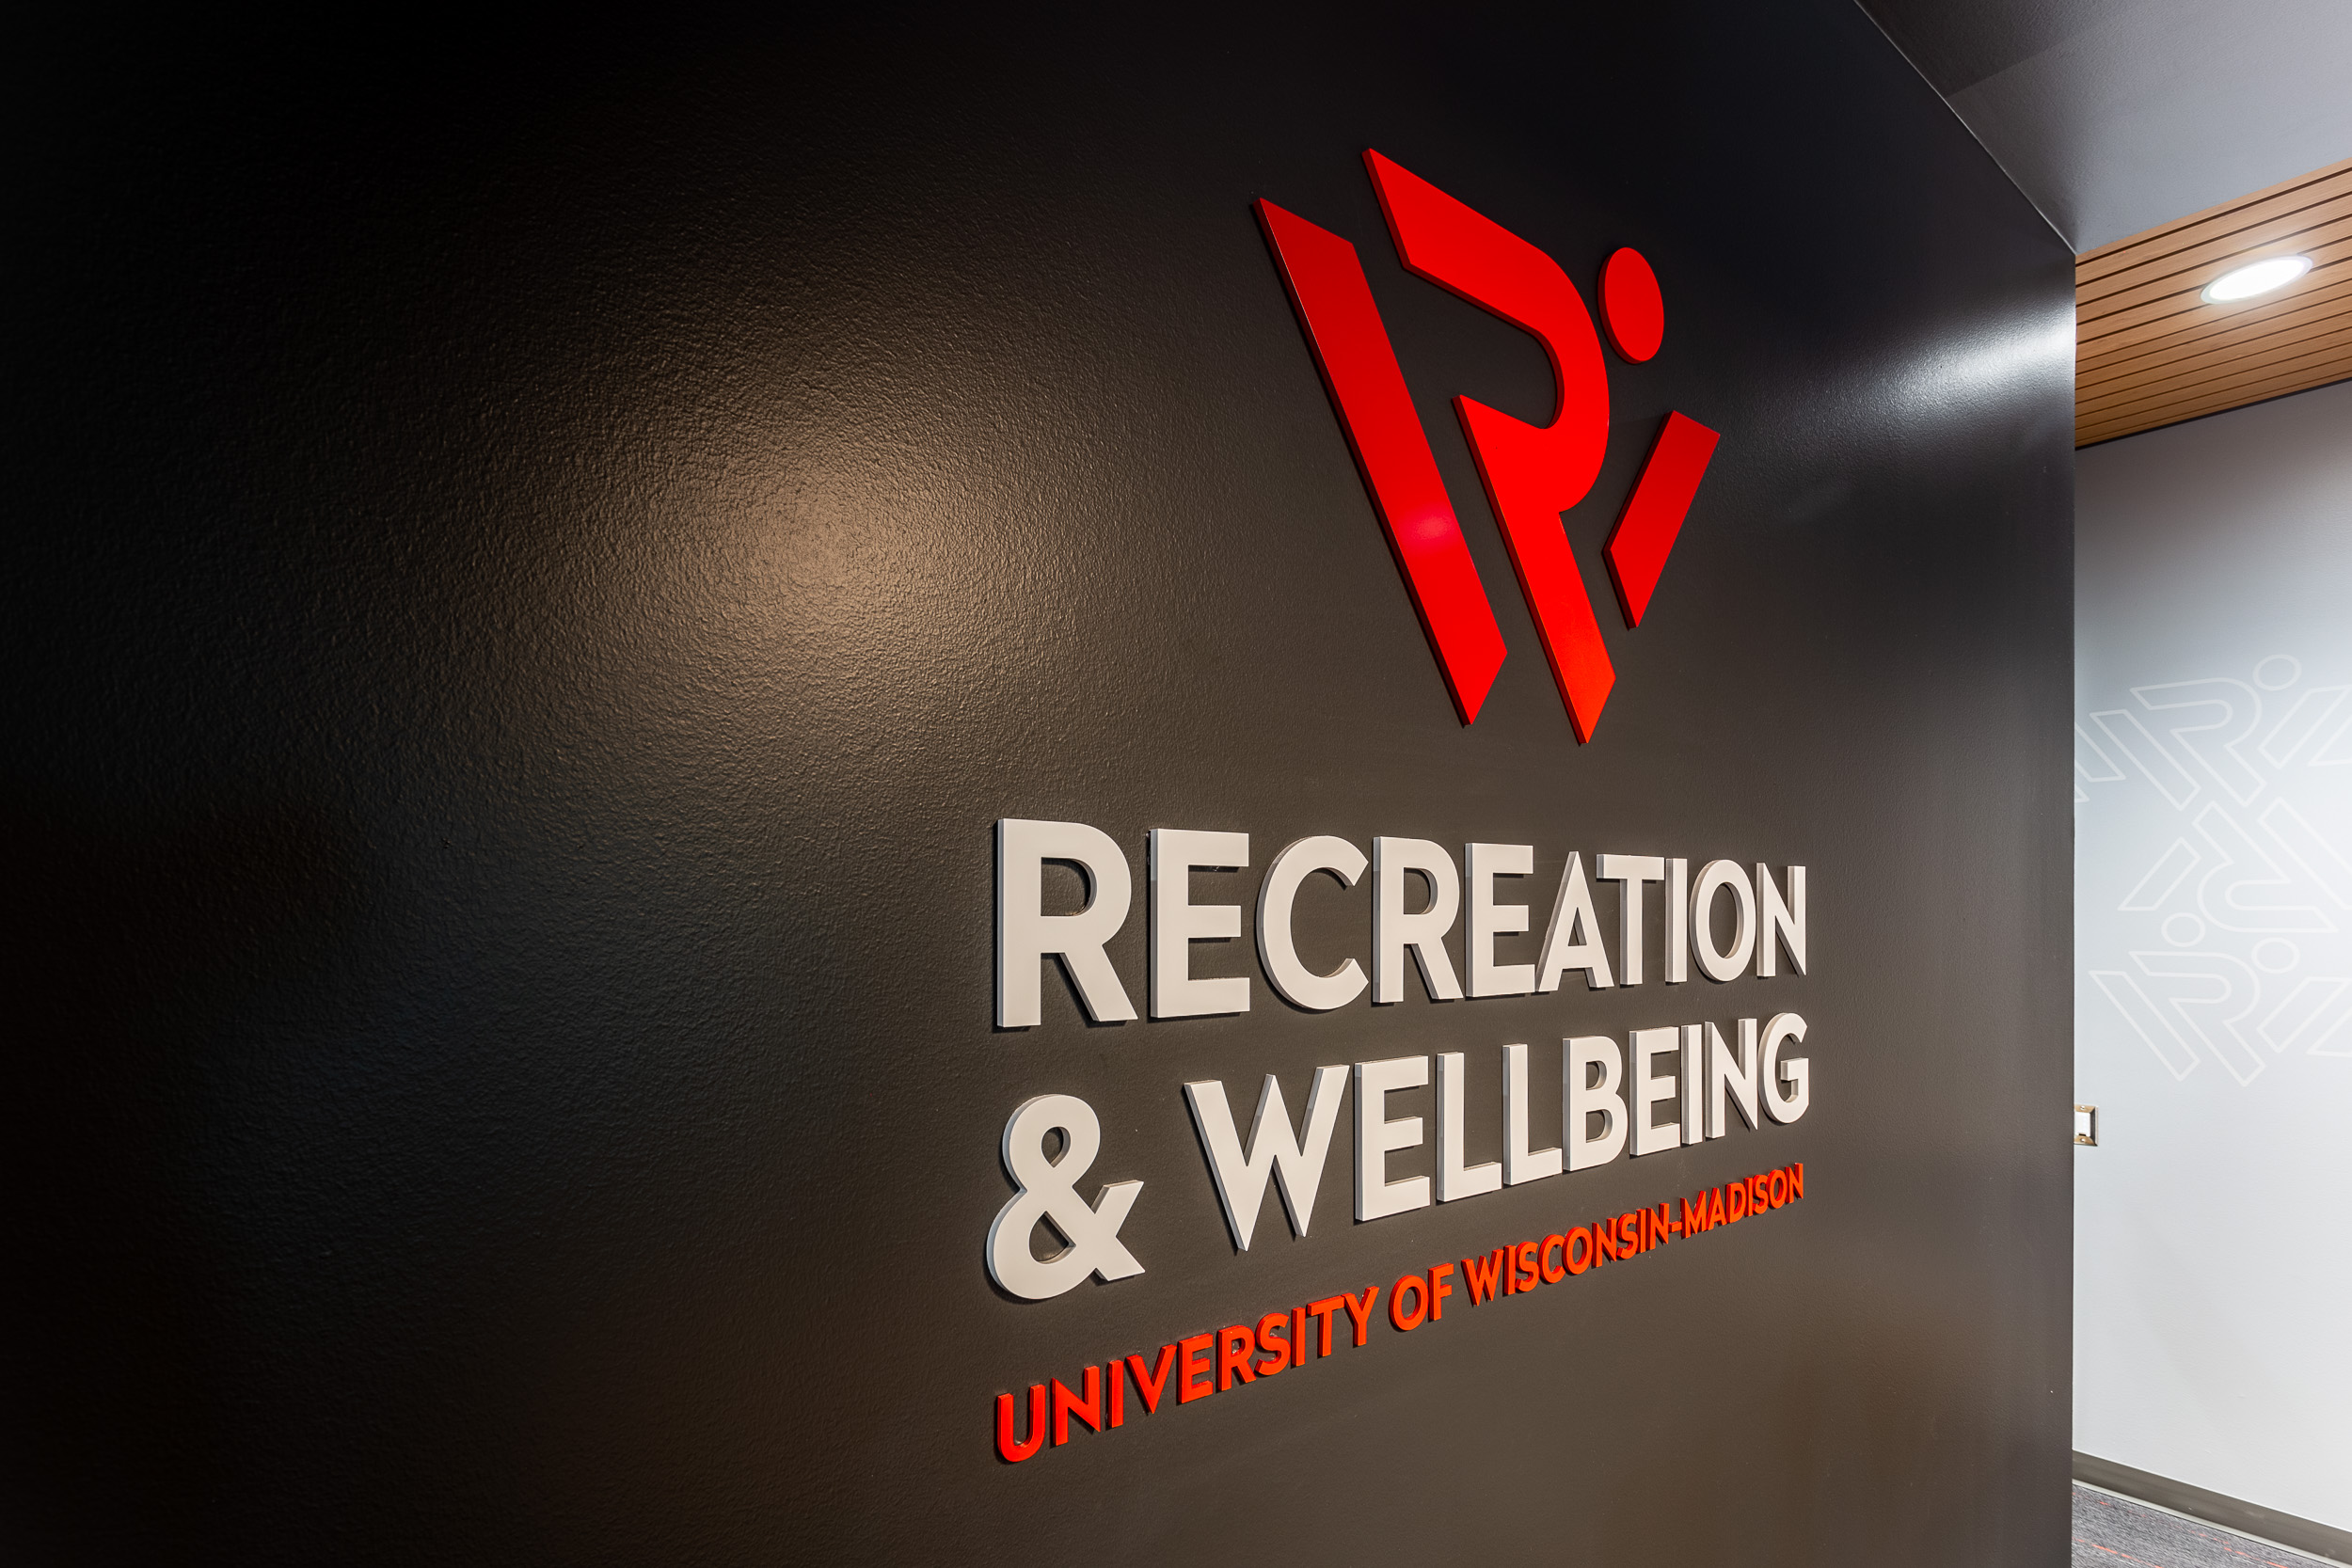 University Of Wisconsin - Recreation & Wellbeing Acrylic Dimensional Logo Detail Photo